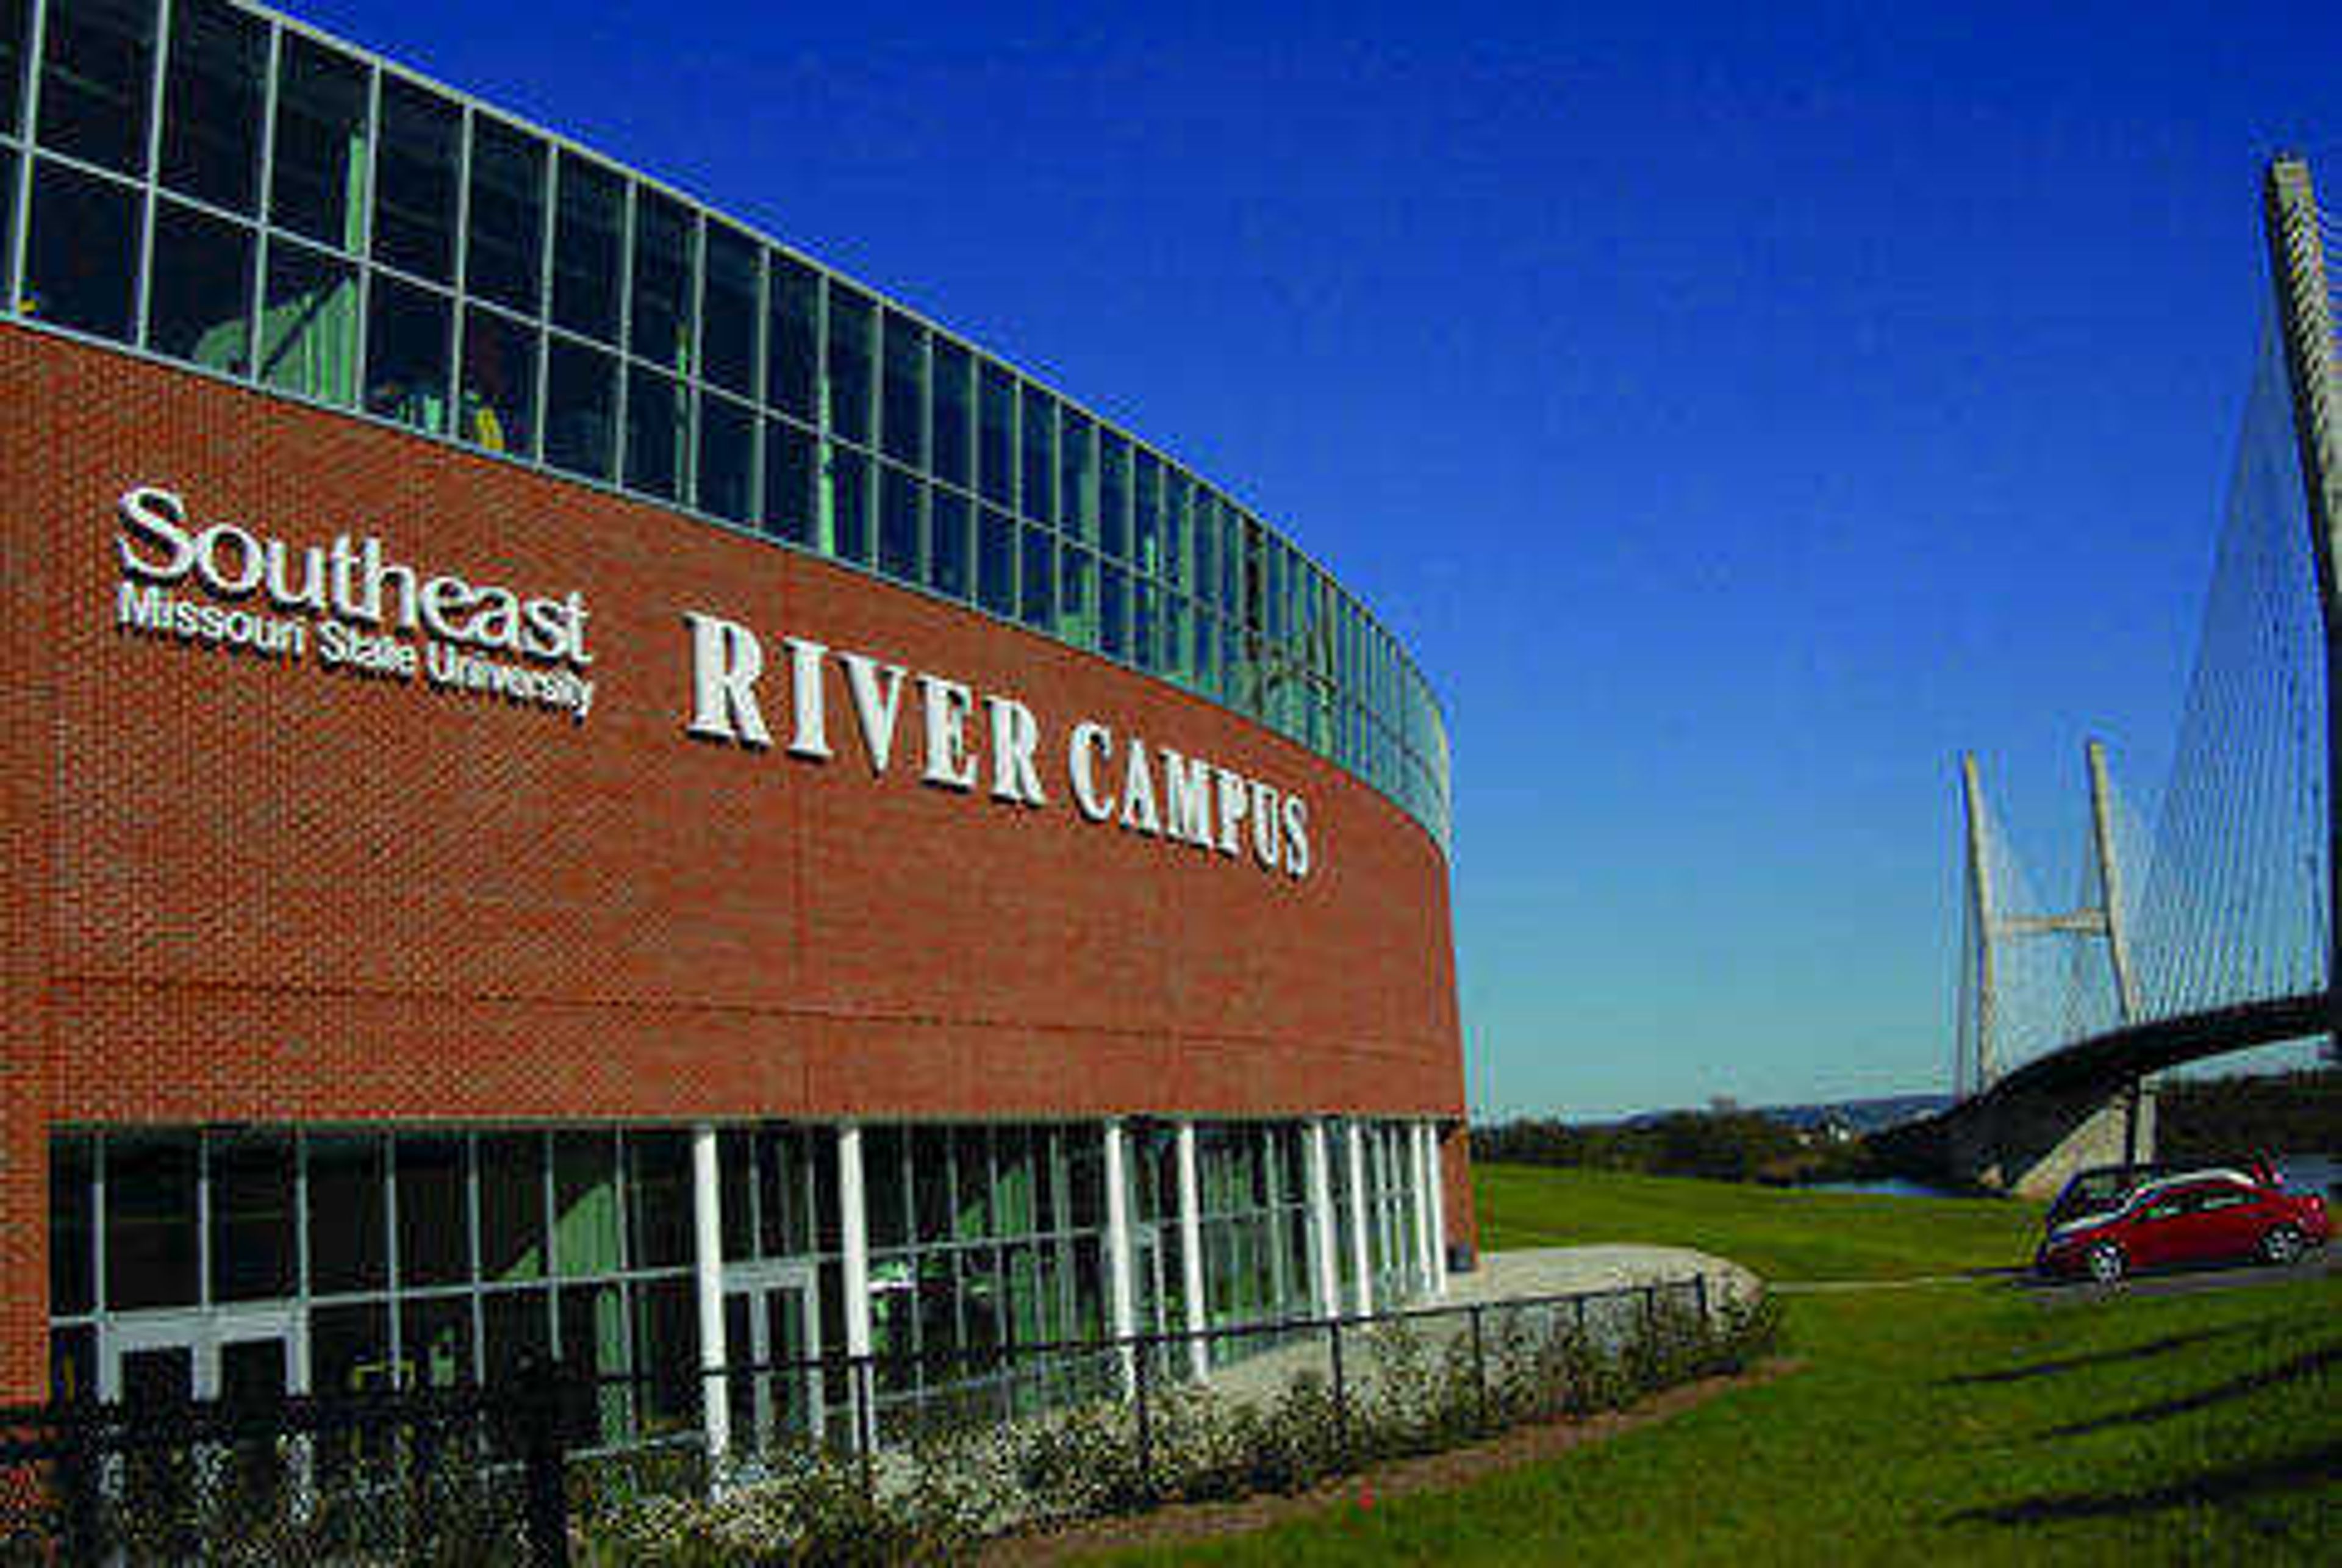 Last Chance to Dance will take place at the River Campus in the Donald C. Bedell Performance Hall. File photo